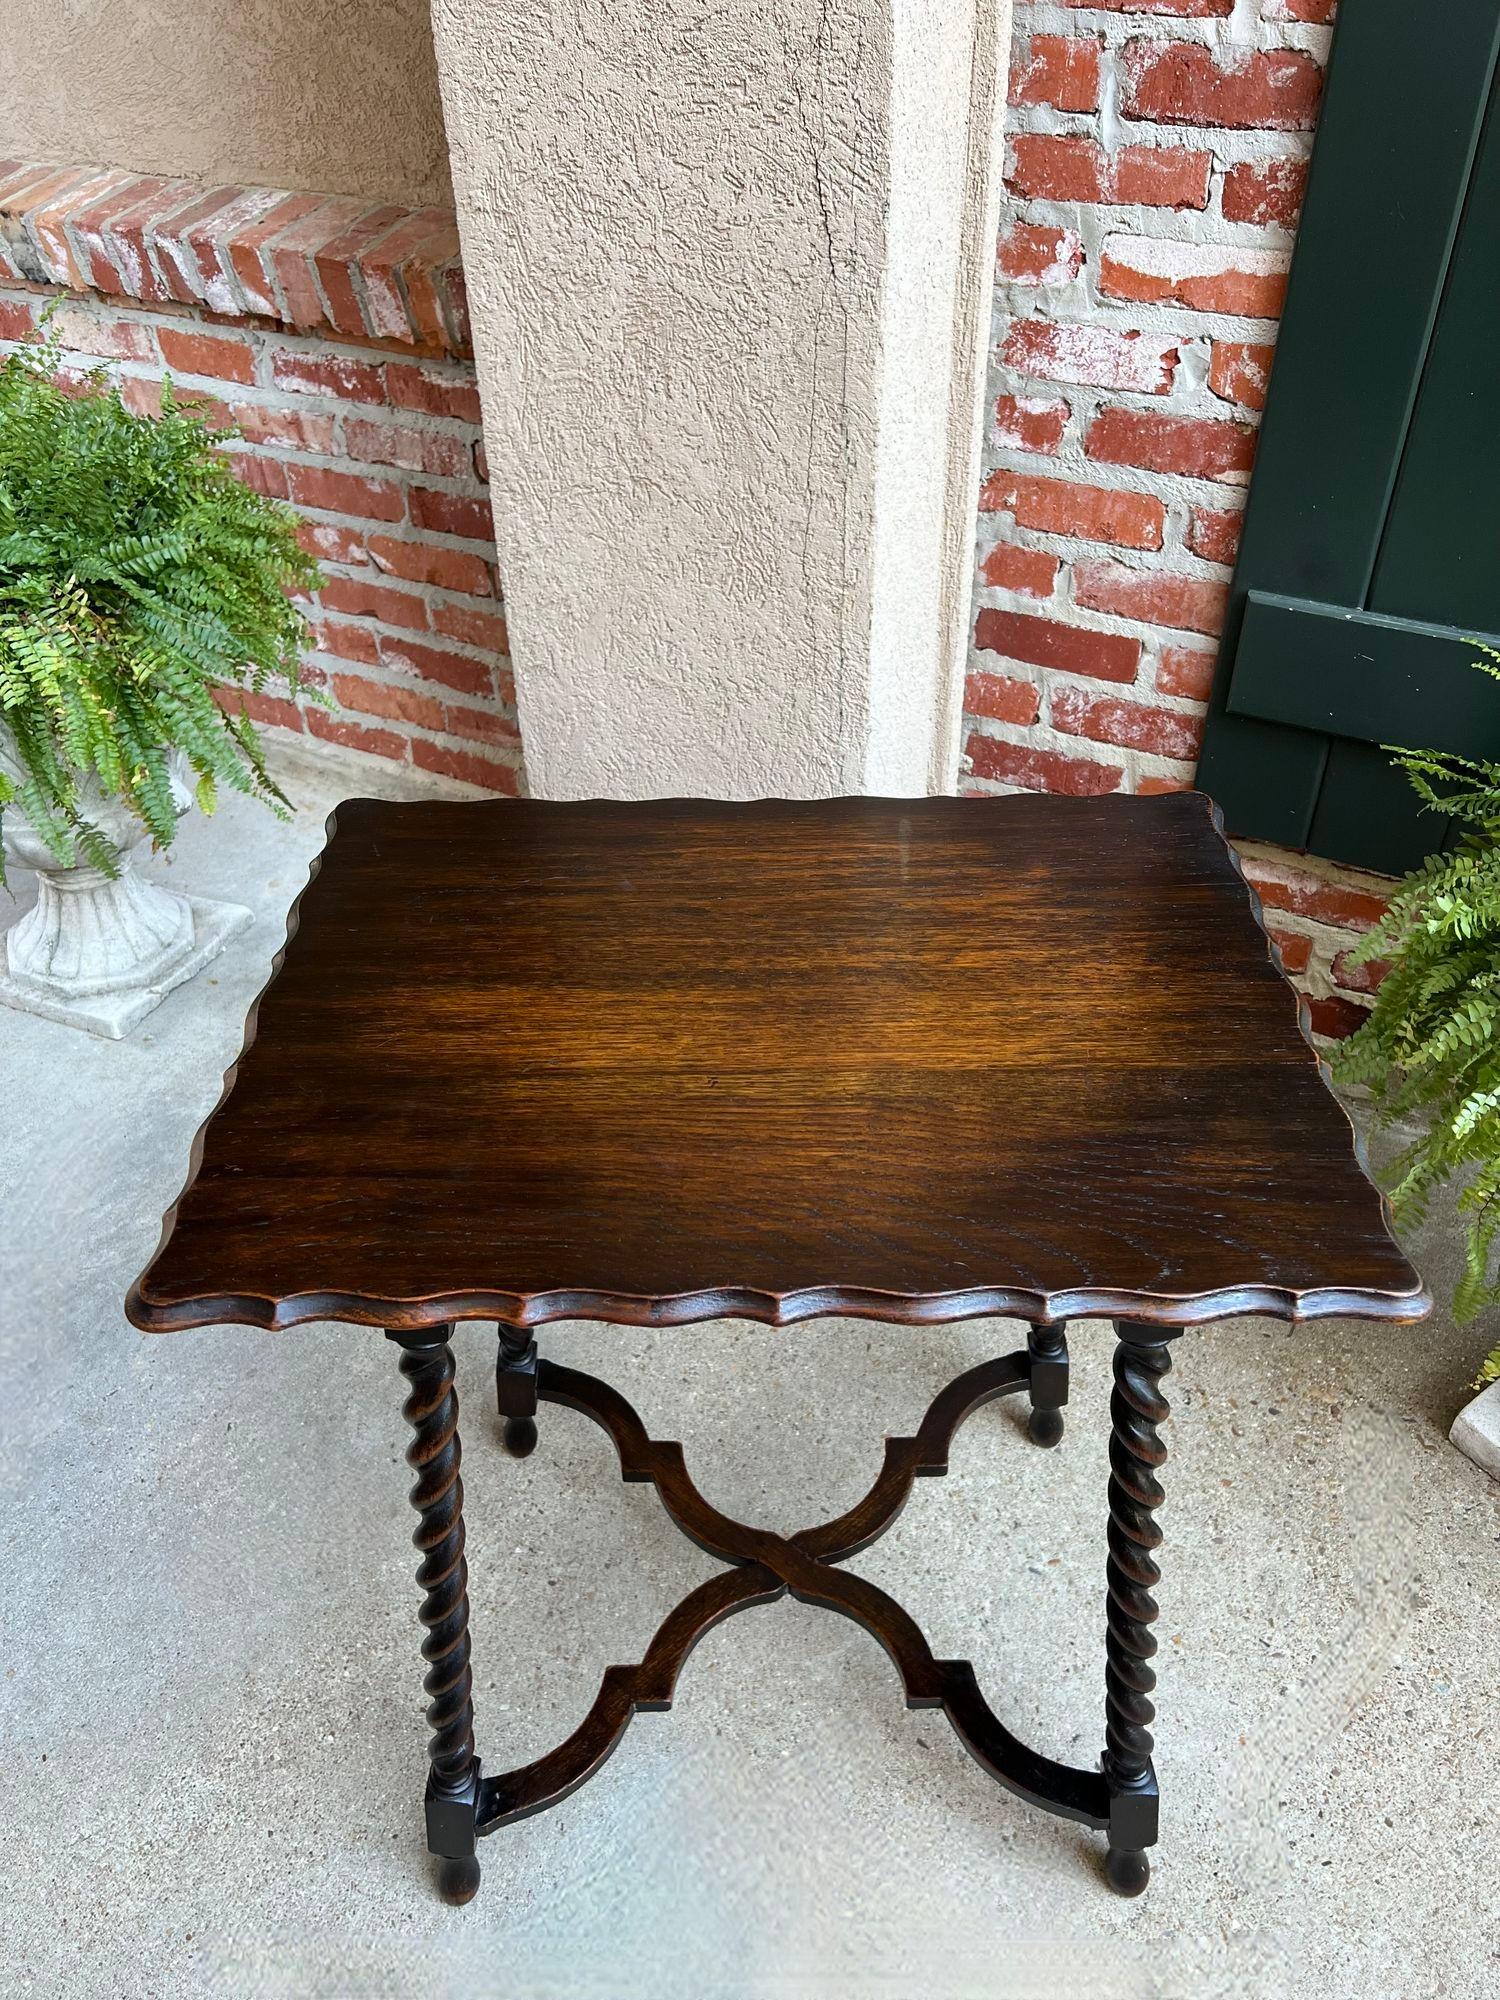 Antique English Oak End Side Table Barley Twist Scalloped Pie Crust Edge.

Direct from England, with classic English style, a lovely antique English oak side or lamp table!

Long, slightly splayed BRITISH BARELY TWIST LEGS are perfectly complimented